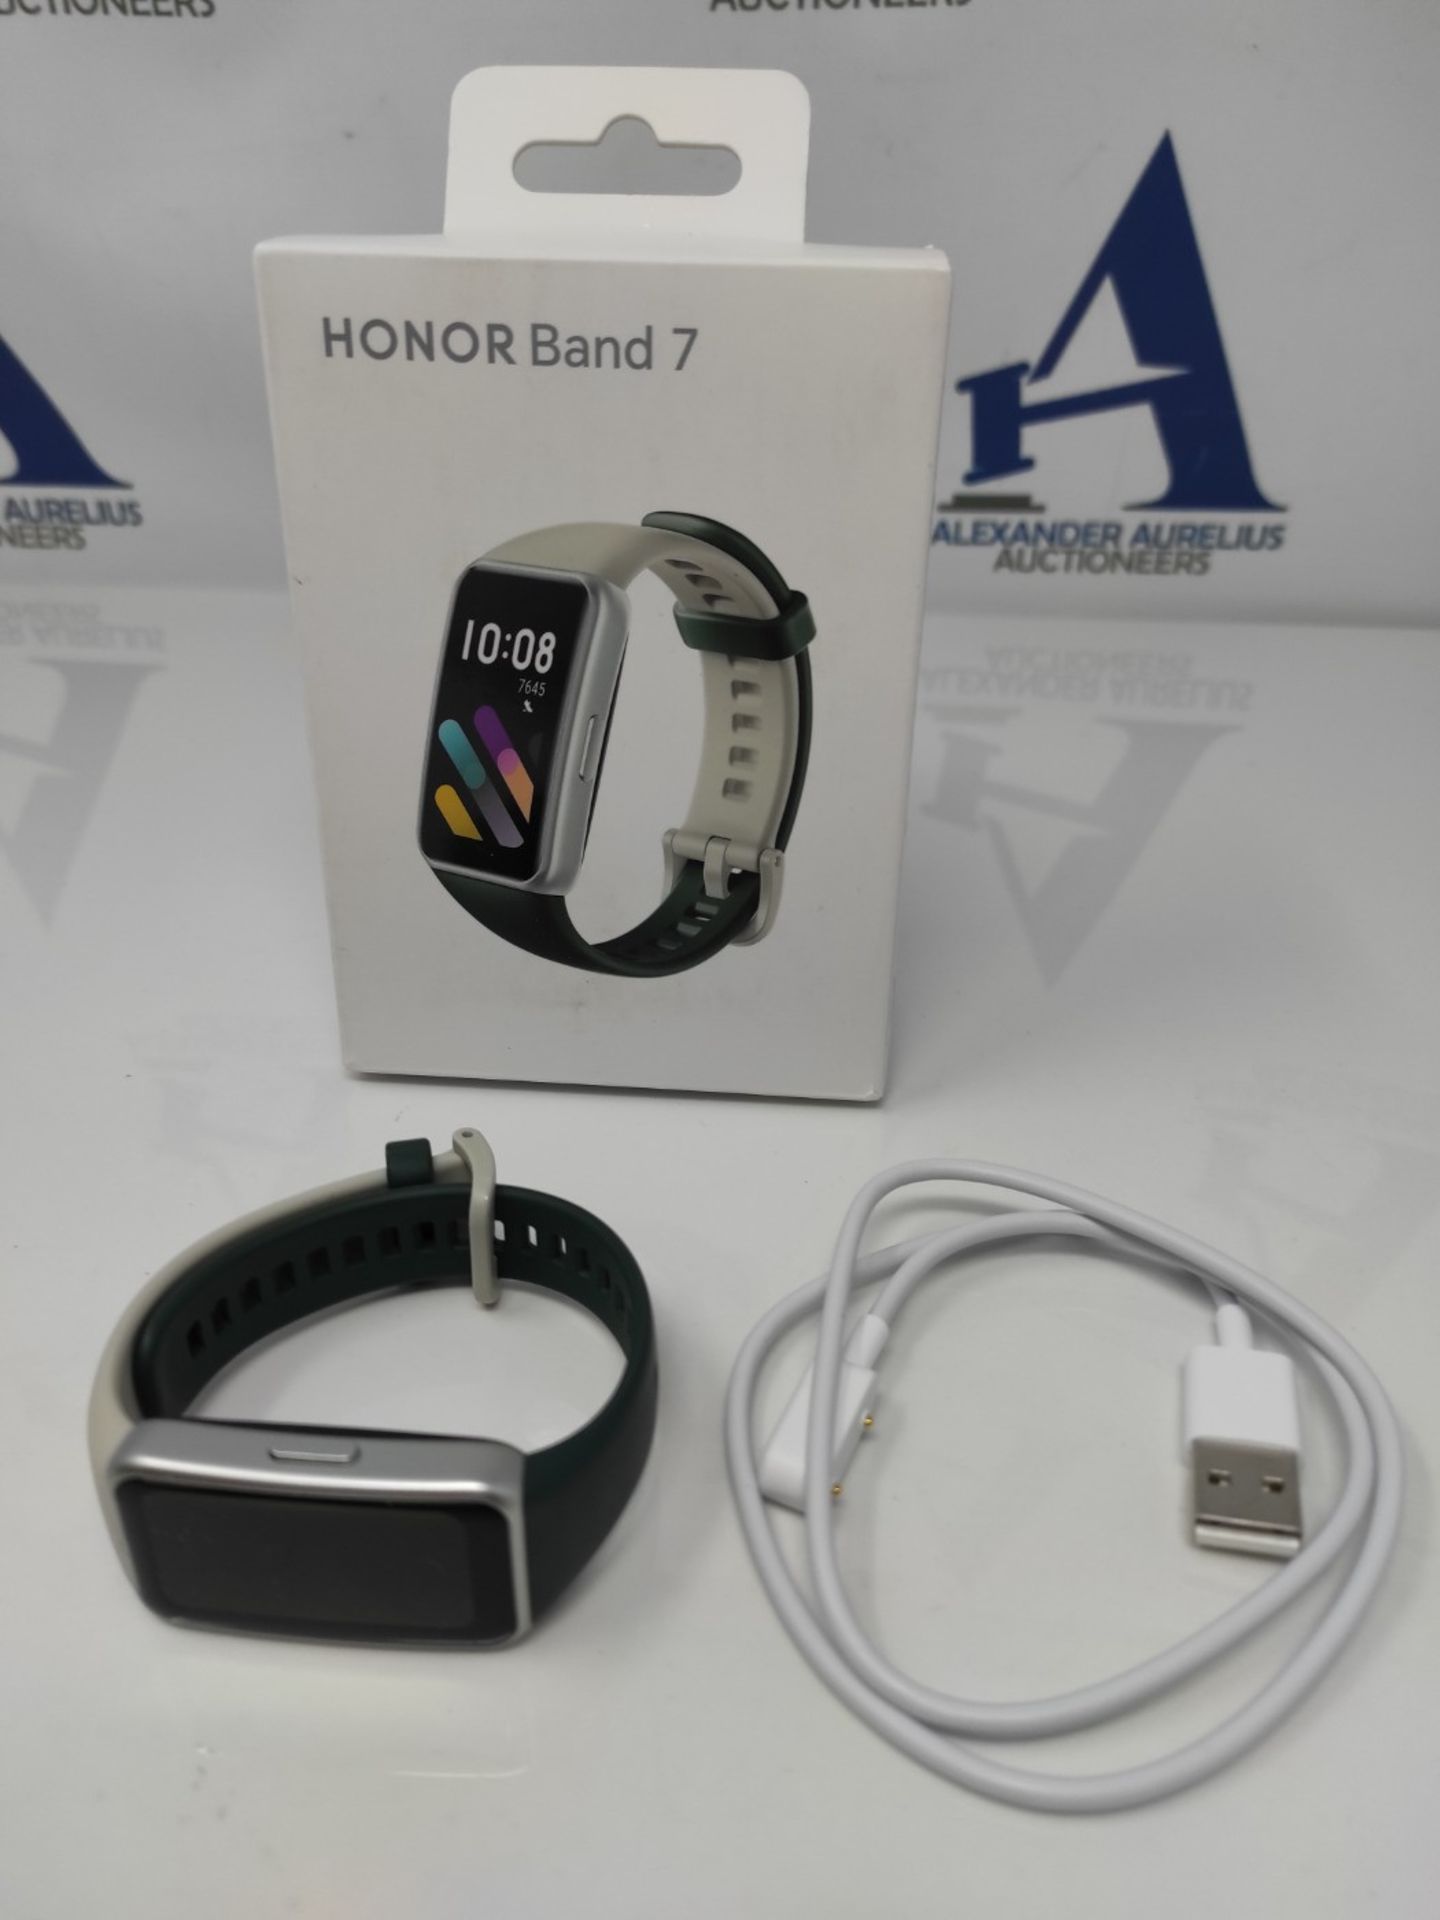 HONOR Band 7, Fitness Tracker, Activity Tracker with Blood Oxygen & Heart Rate Monitor - Image 2 of 2